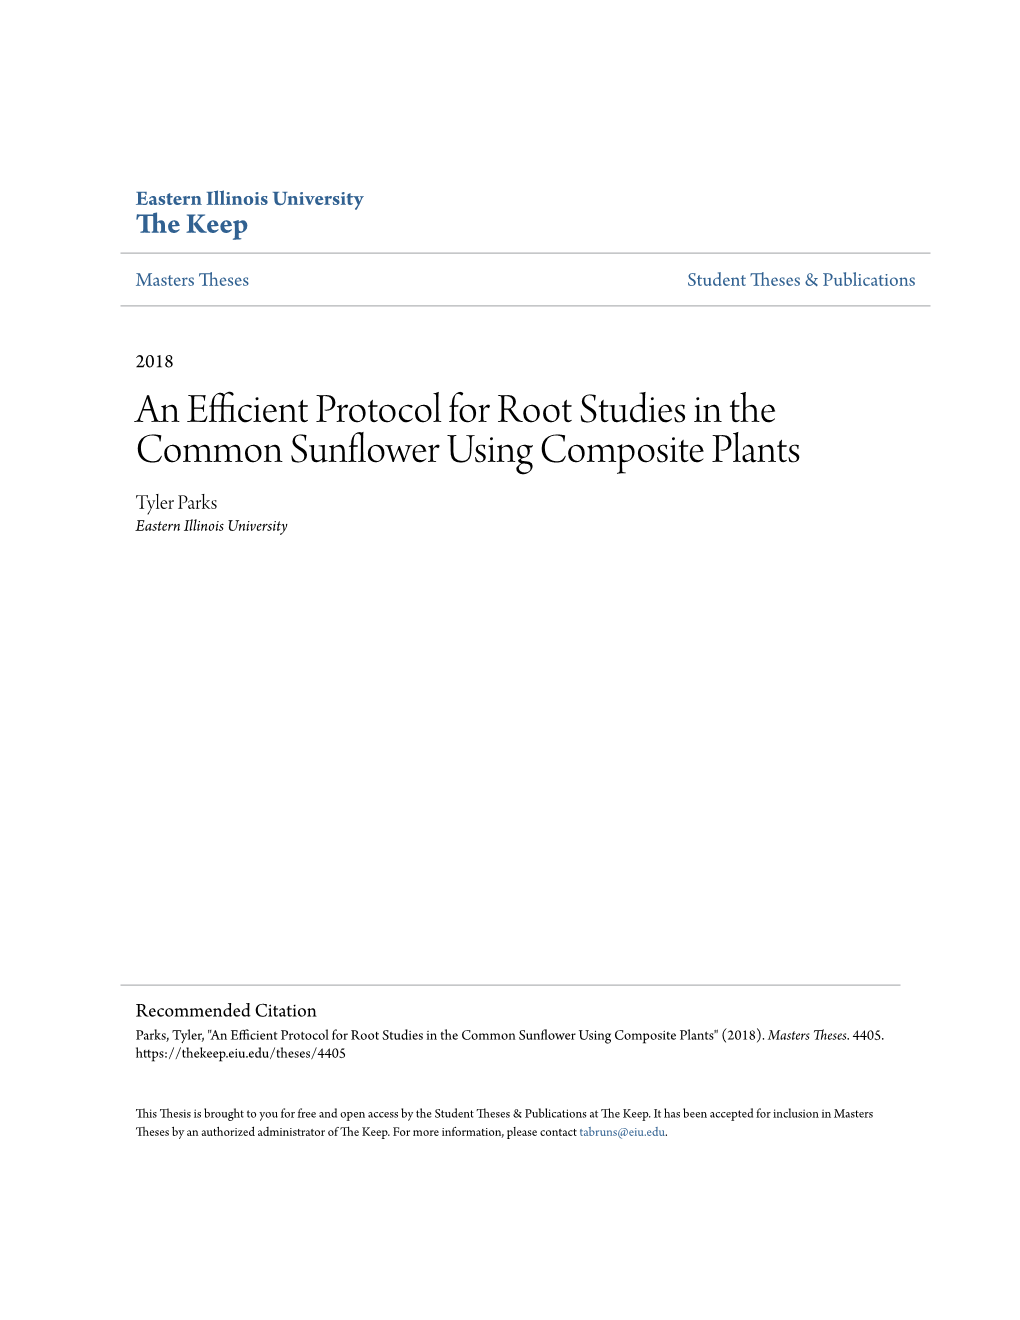 An Efficient Protocol for Root Studies in the Common Sunflower Using Composite Plants Tyler Parks Eastern Illinois University